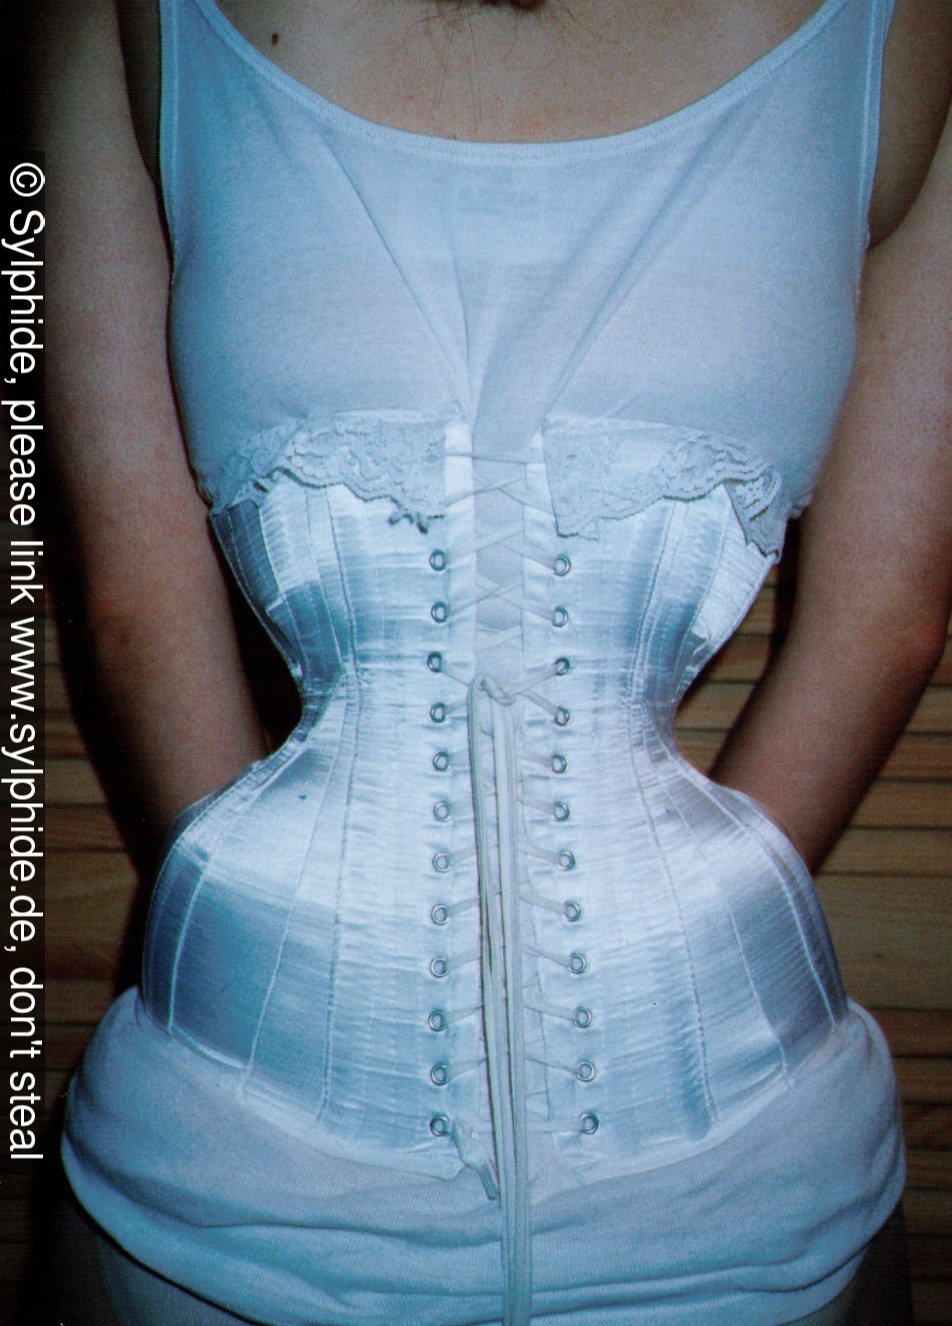 Satin corset tight laced to 18 inch - Sylphide - Tight corsets, figure  training, waist reduction and tightlacing